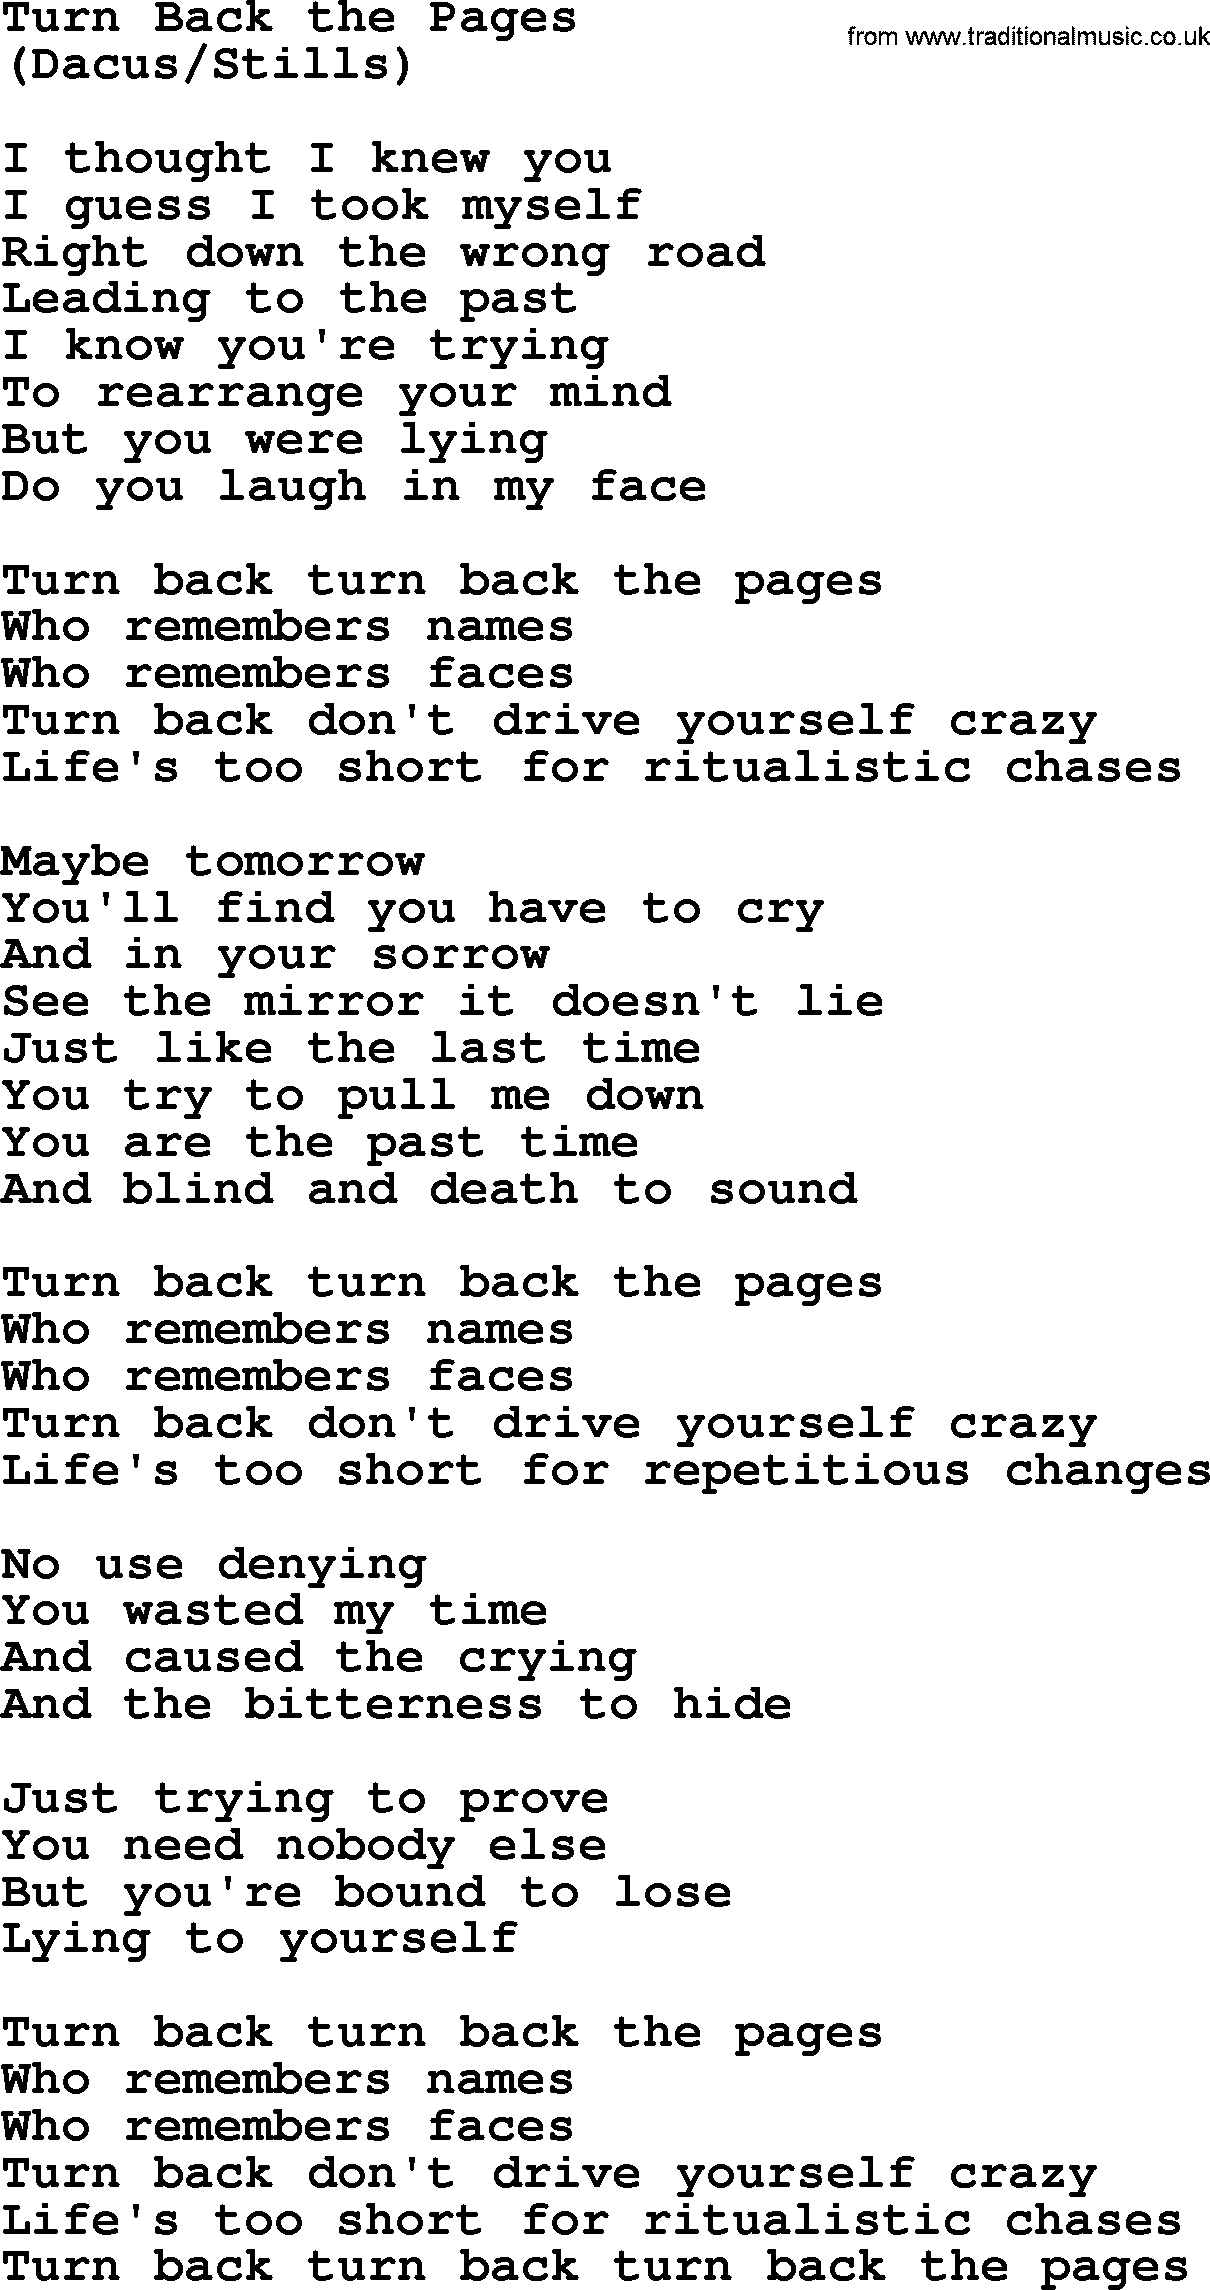 Turn Back The Pages, by The Byrds - lyrics with pdf